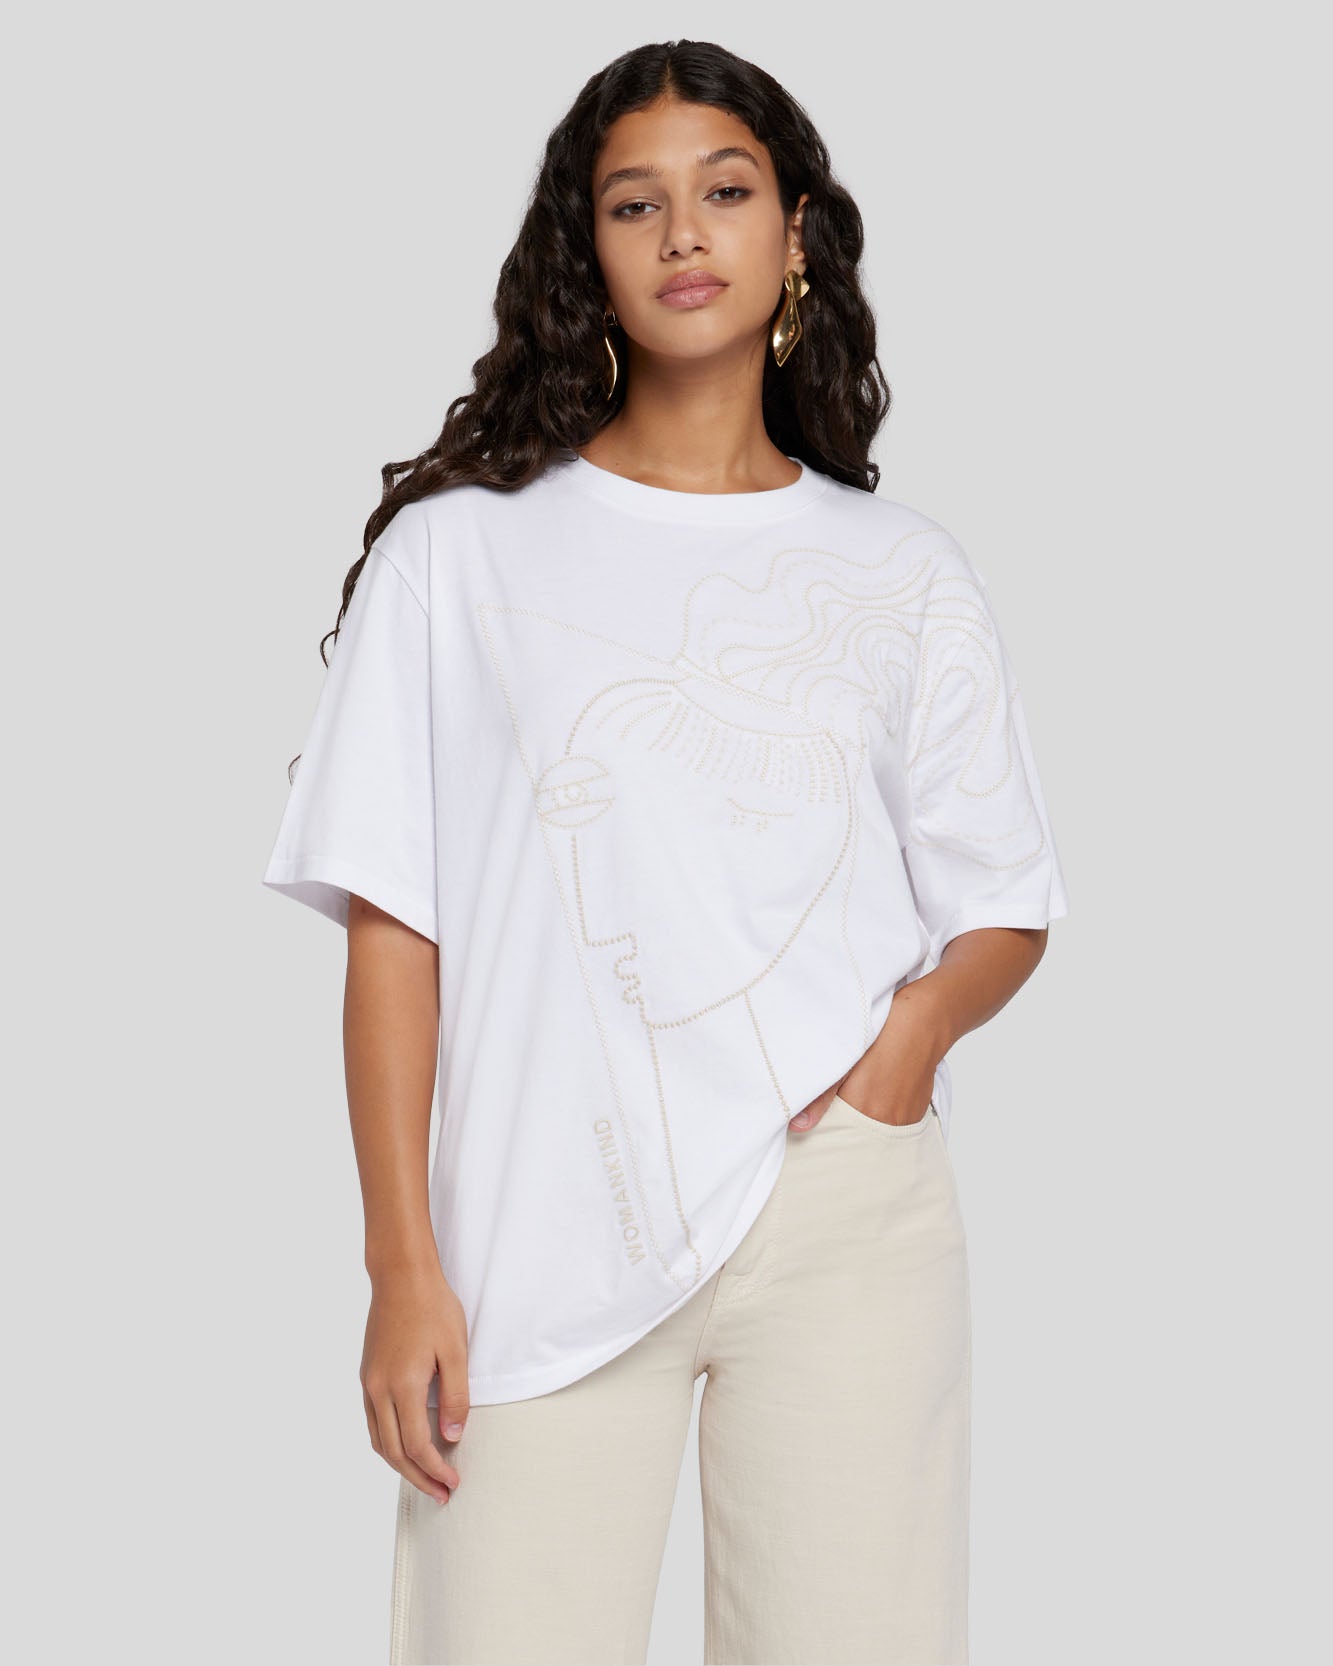 Alexandra Nechita Embroidered Tee in Off White | 7 For All Mankind